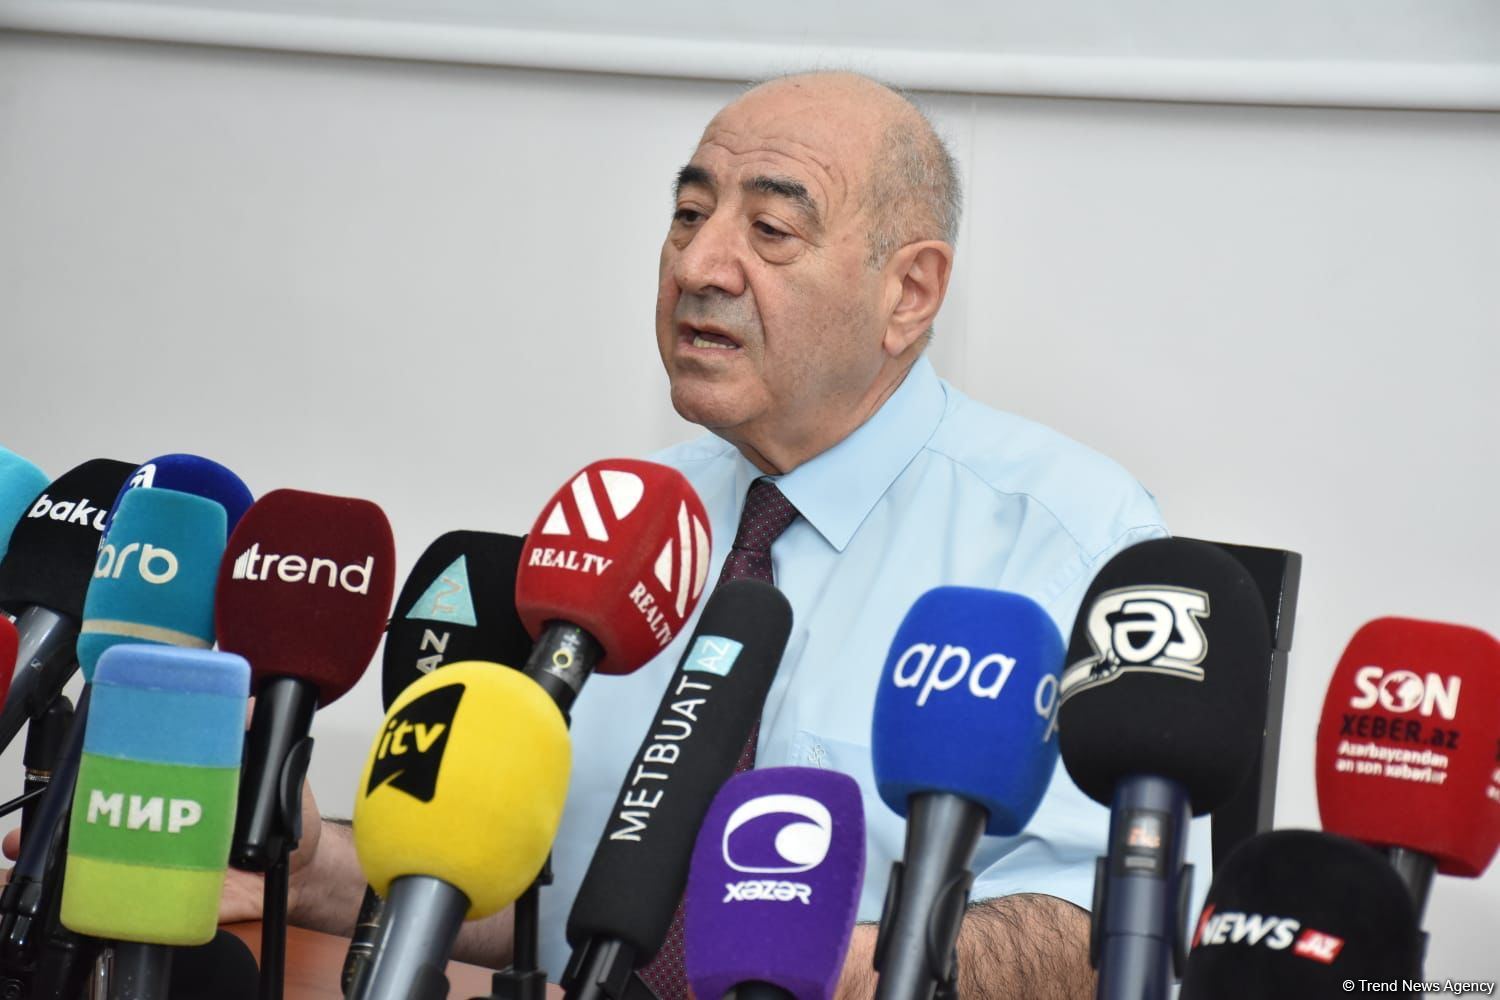 Another earthquake of this magnitude unlikely to happen in Azerbaijan - Seismic Survey Center